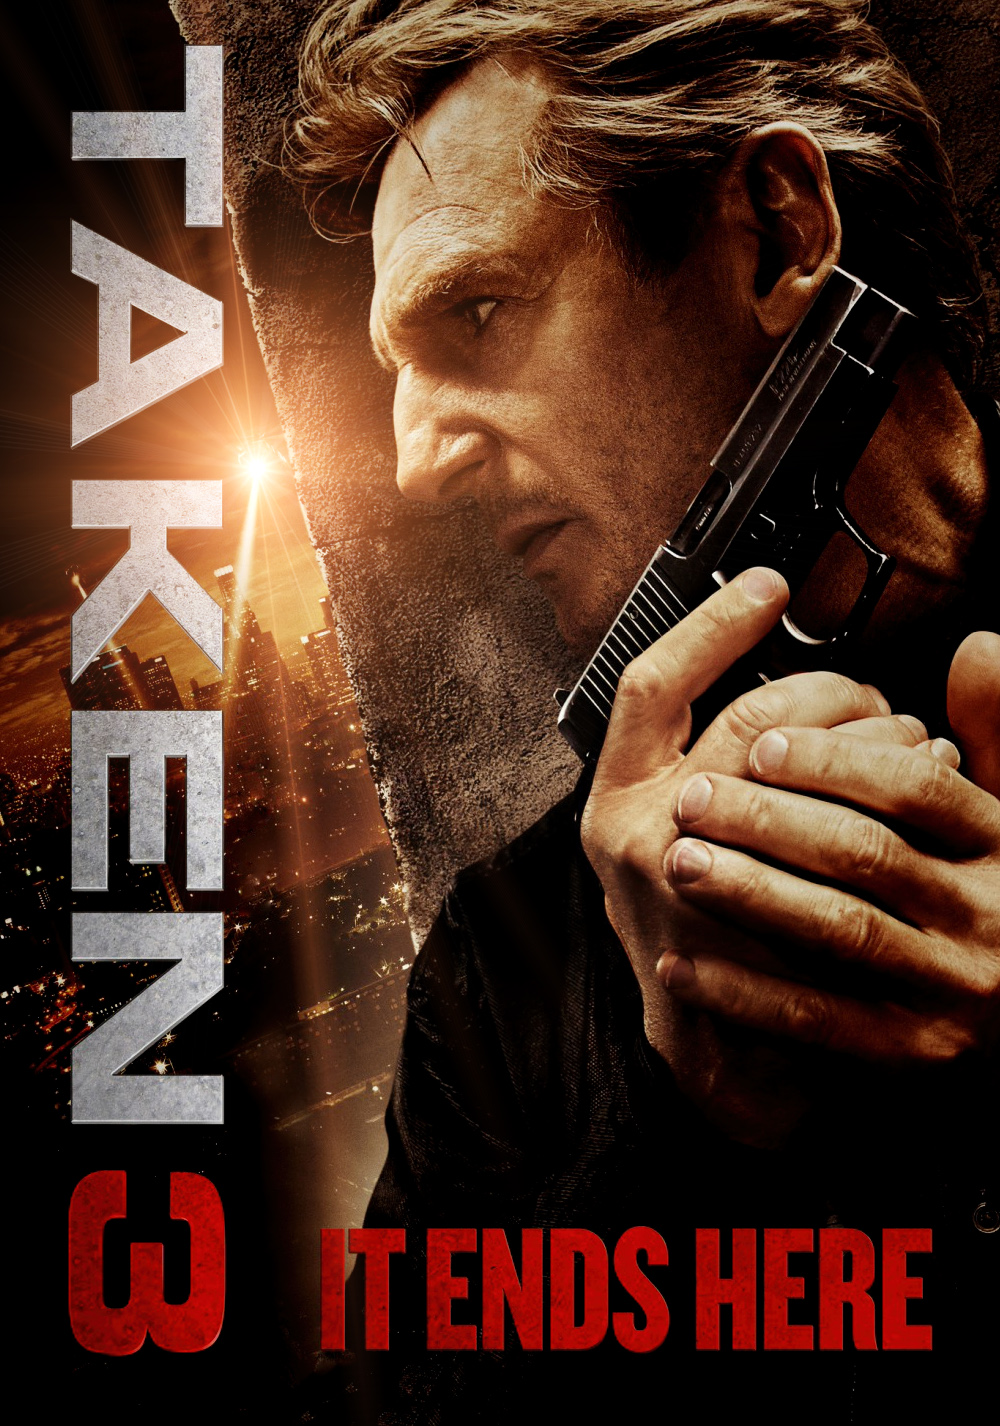 Taken 3 Picture Image Abyss